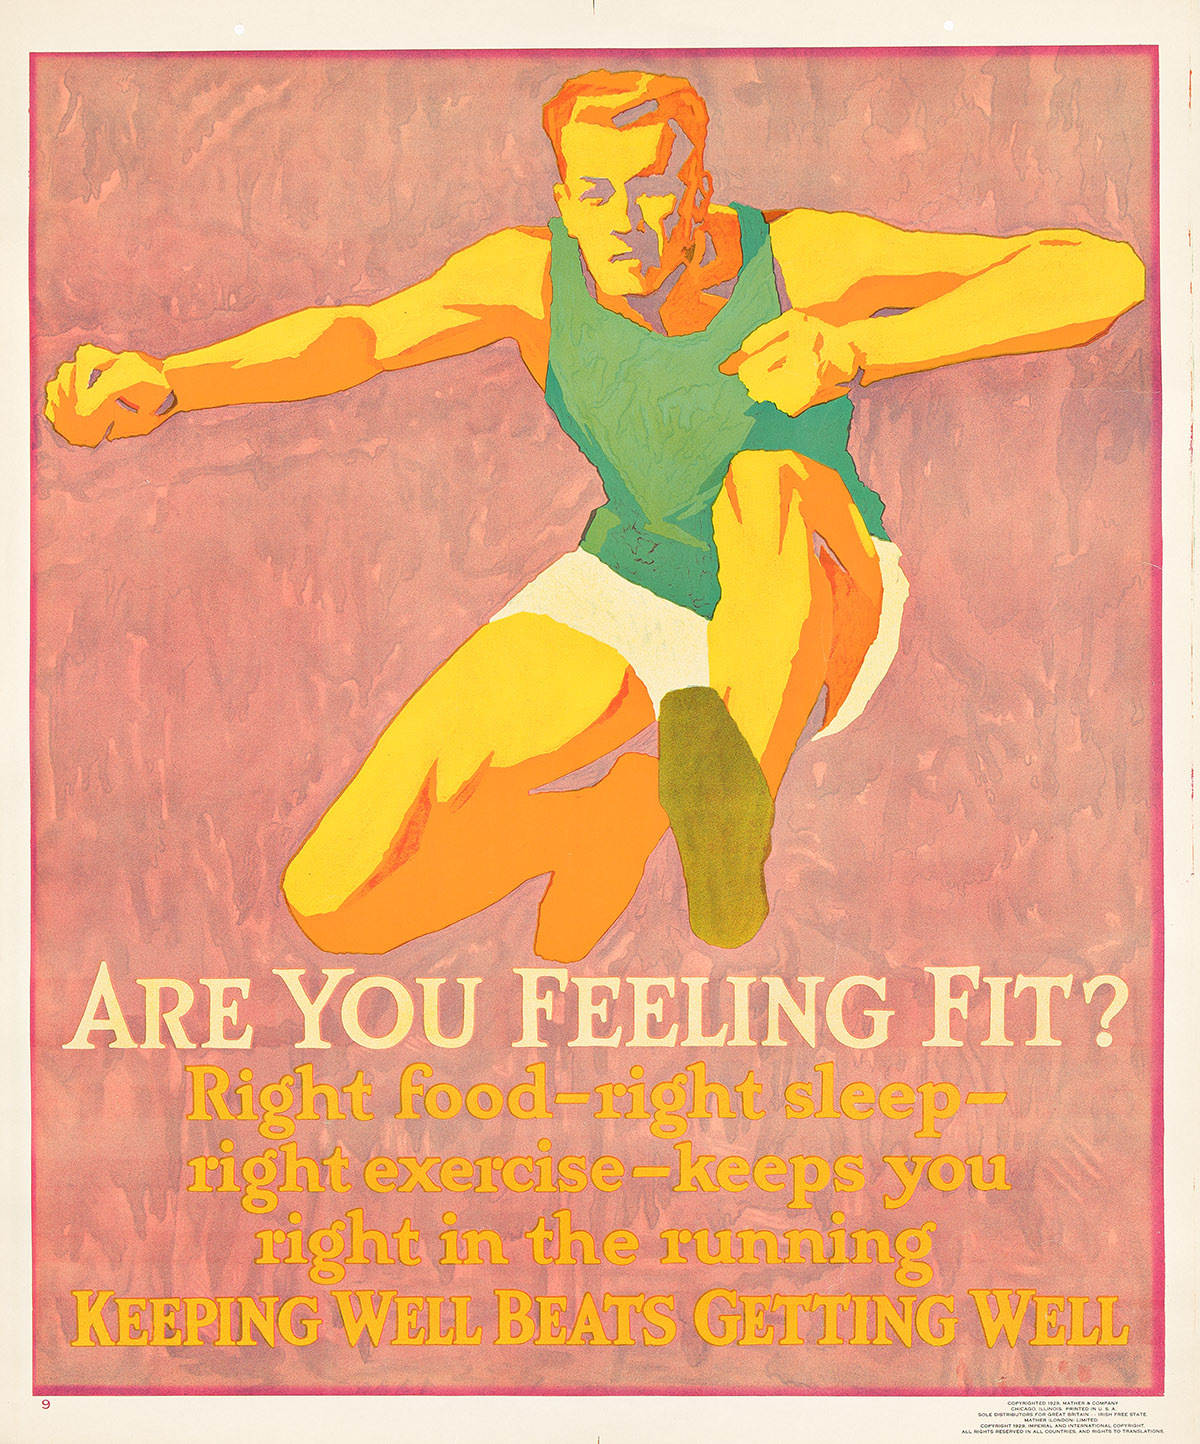 DESIGNER UNKNOWN. ARE YOU FEELING FIT? / KEEPING WELL BEATS GETTING WELL. 1929. 43½x36½ inches, 110½x92¾ cm. Mather & Company, Chicago.